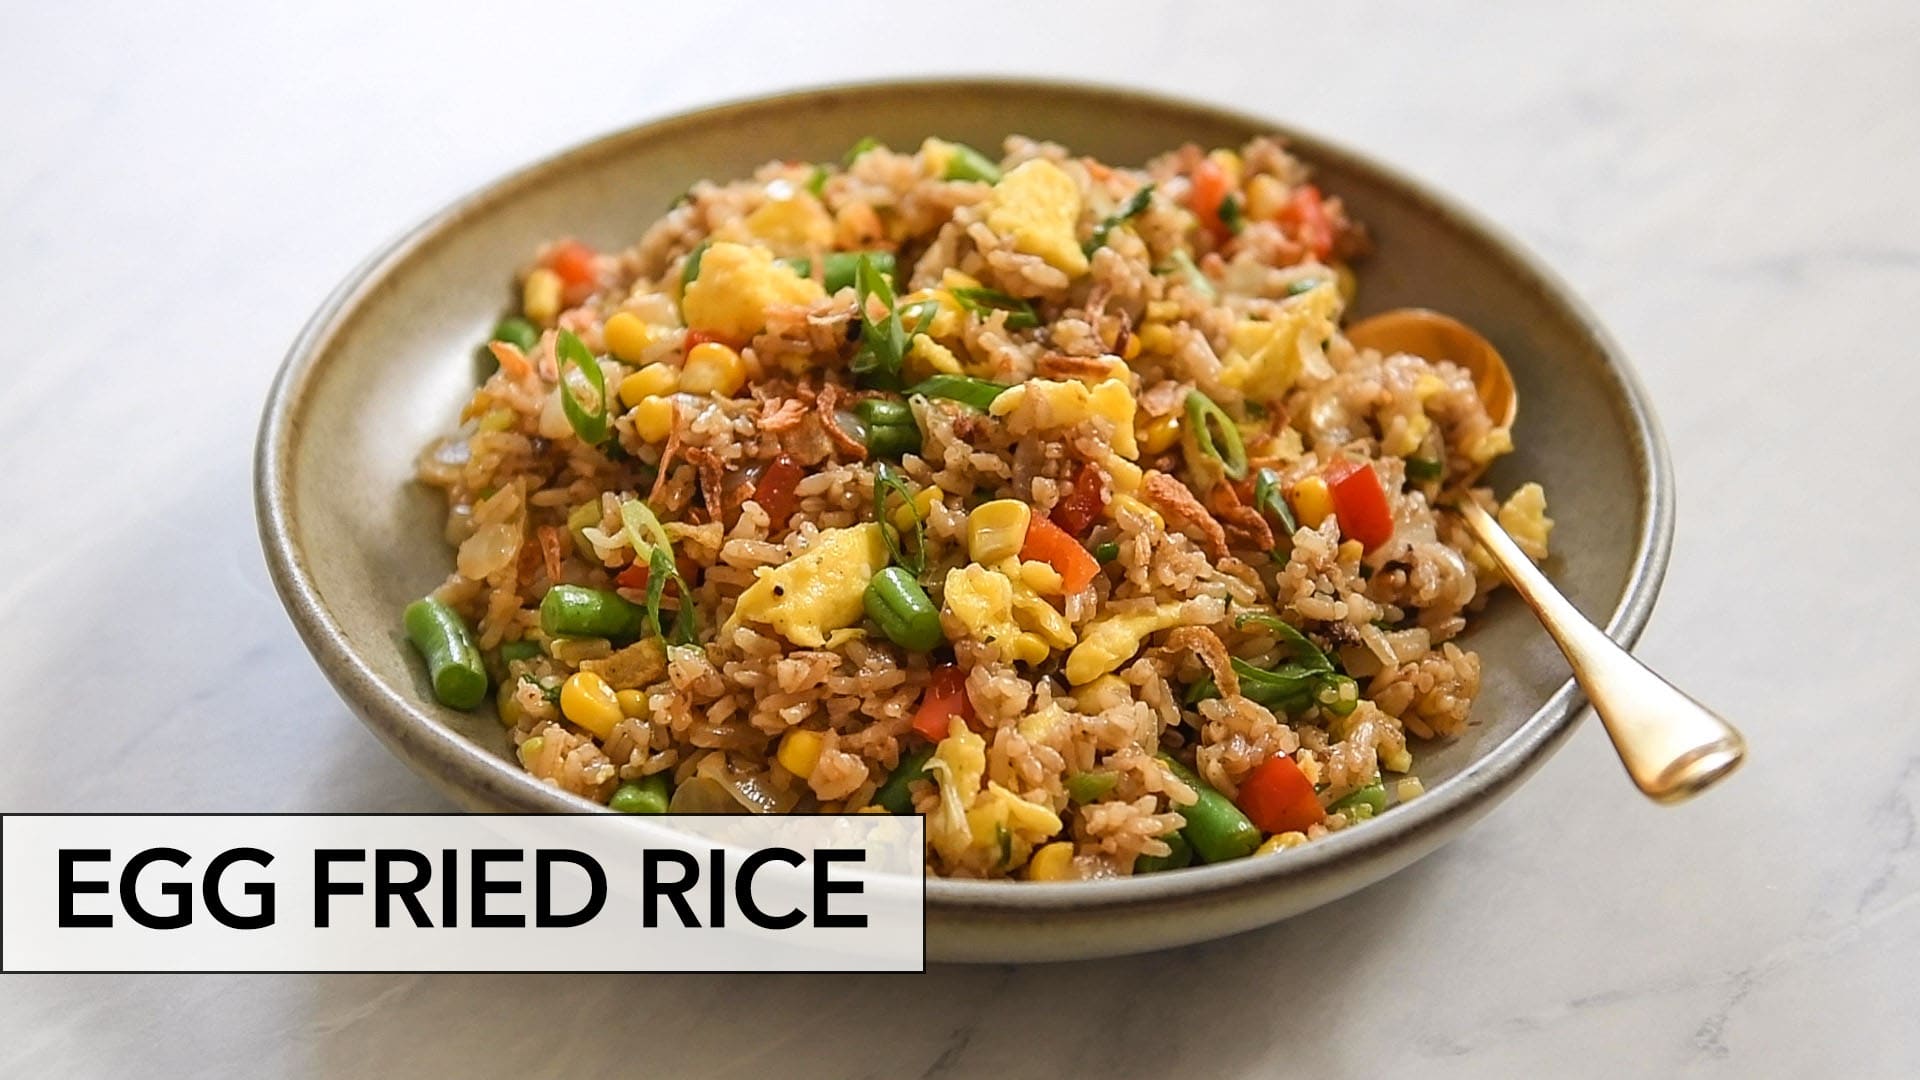 Egg Fried Rice - The flavours of kitchen